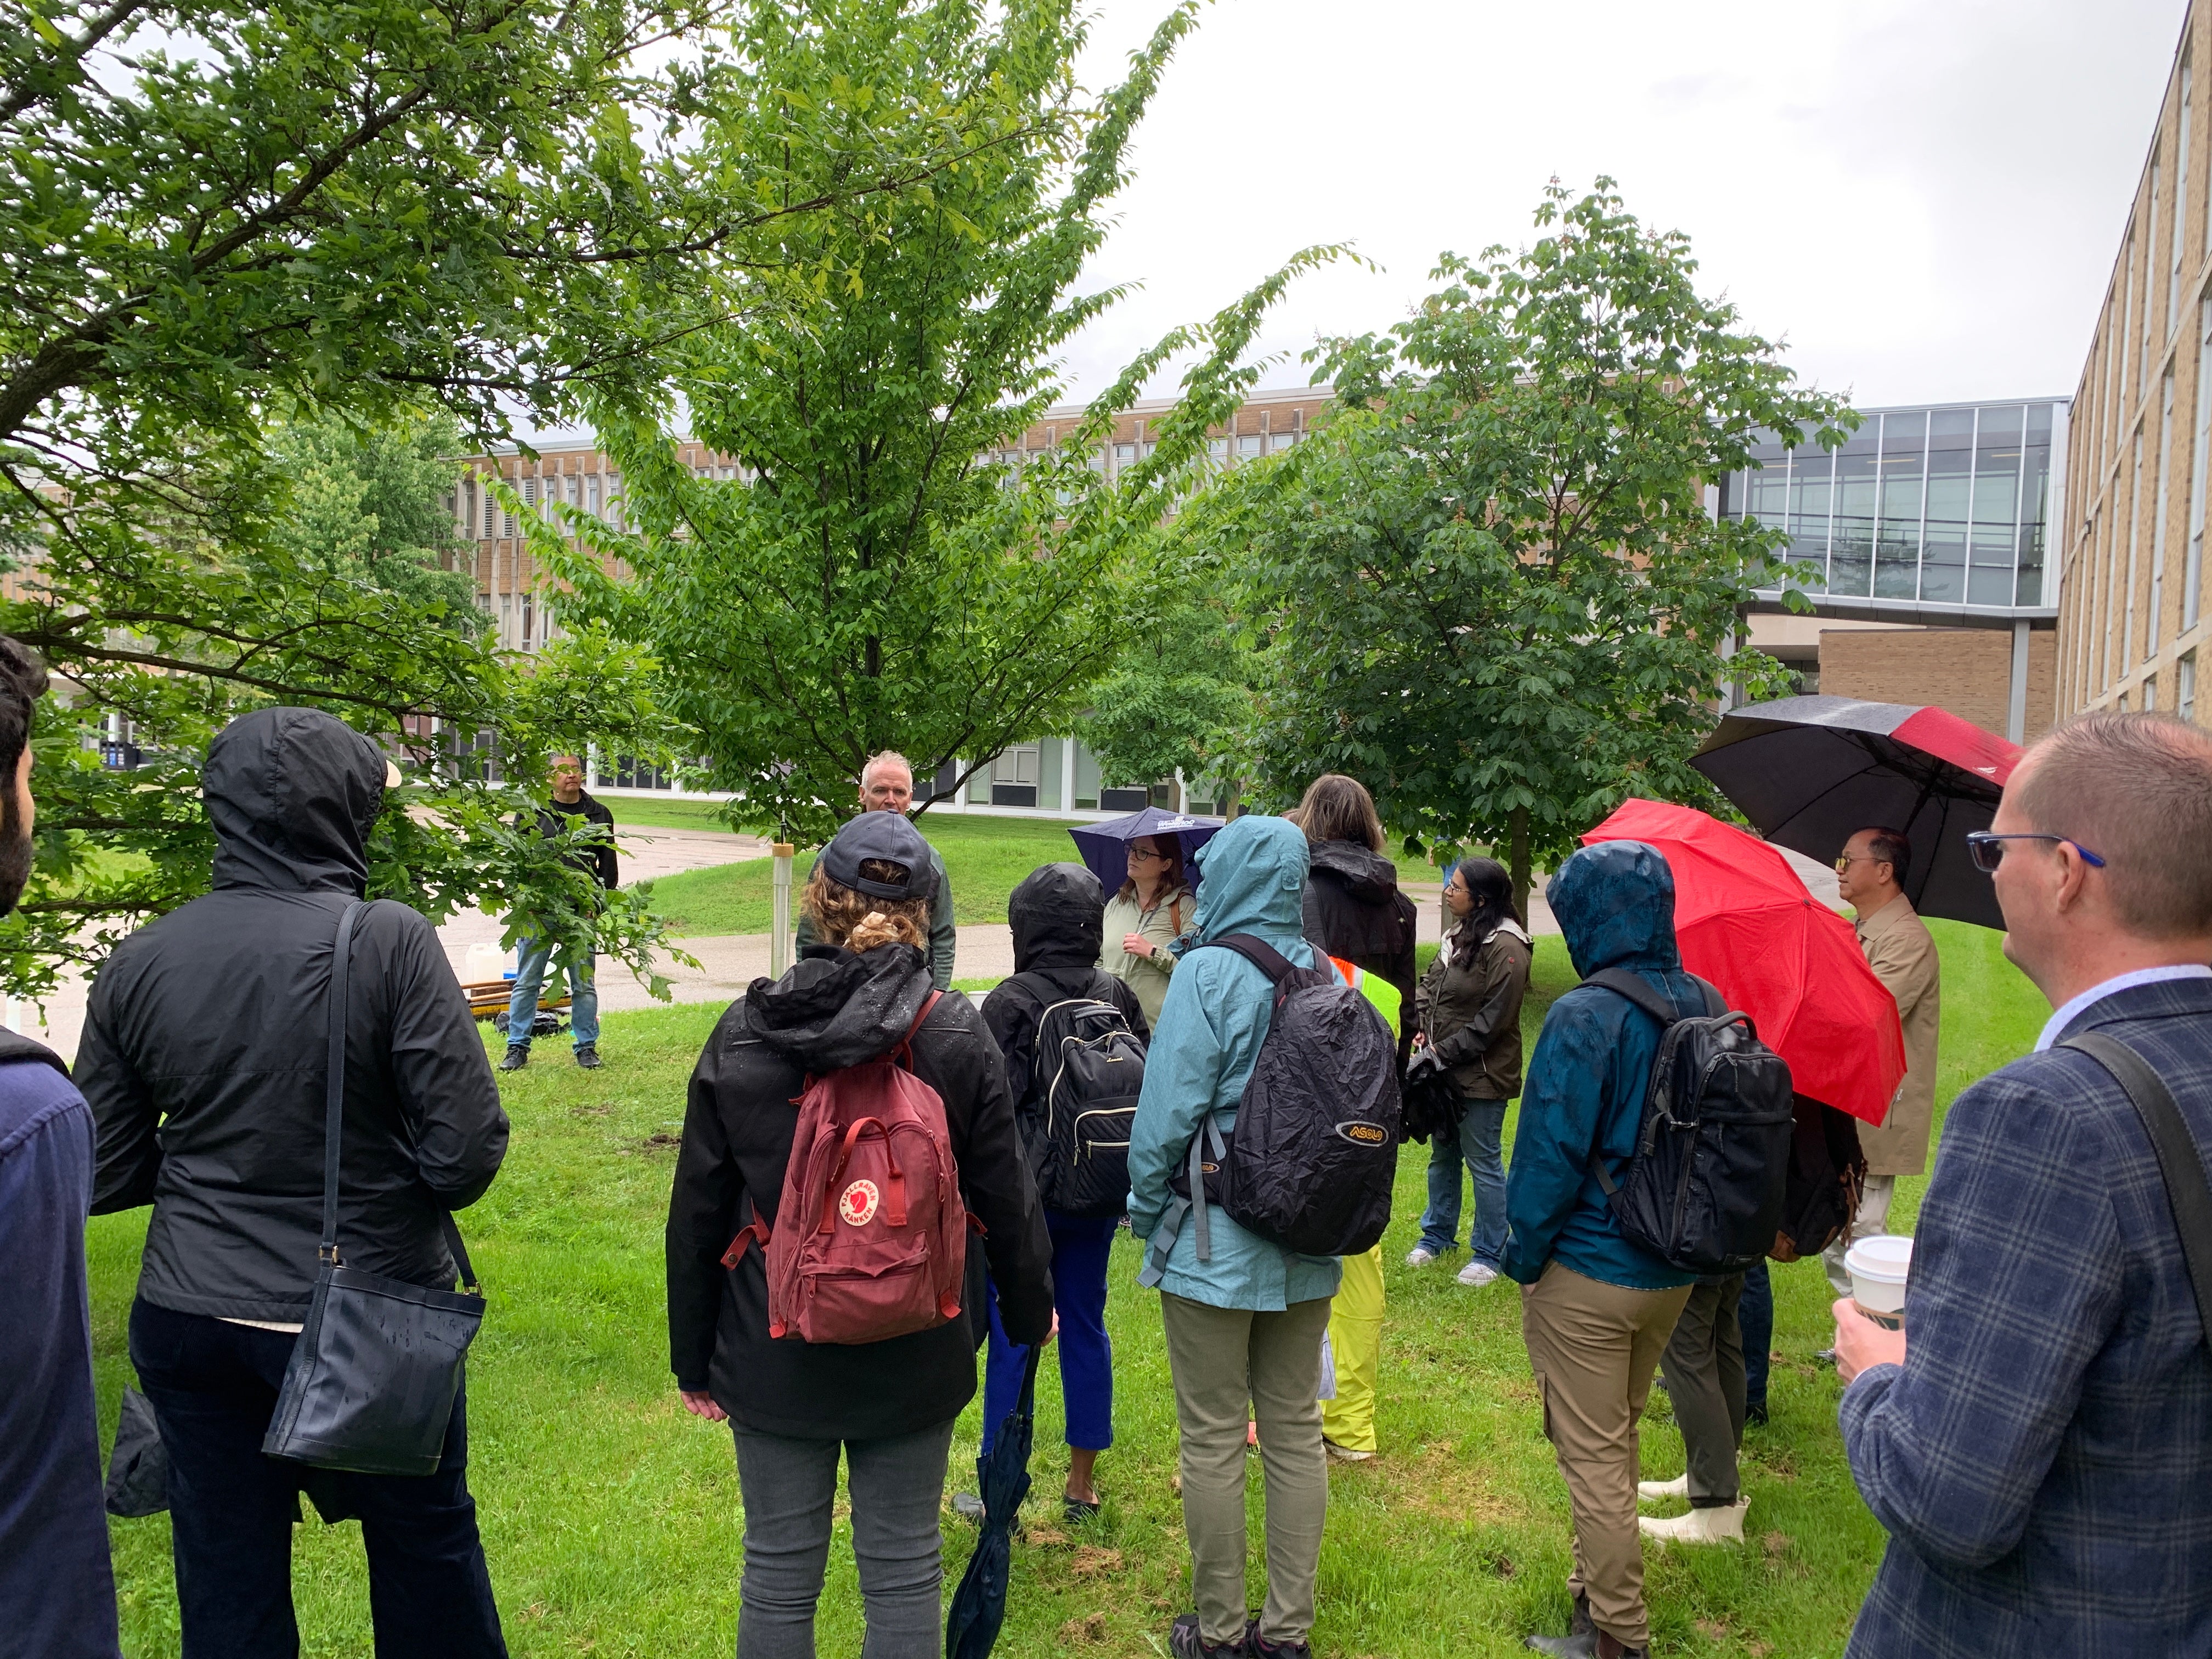 Participants observing the stormwater hydrology demonstration on campus.